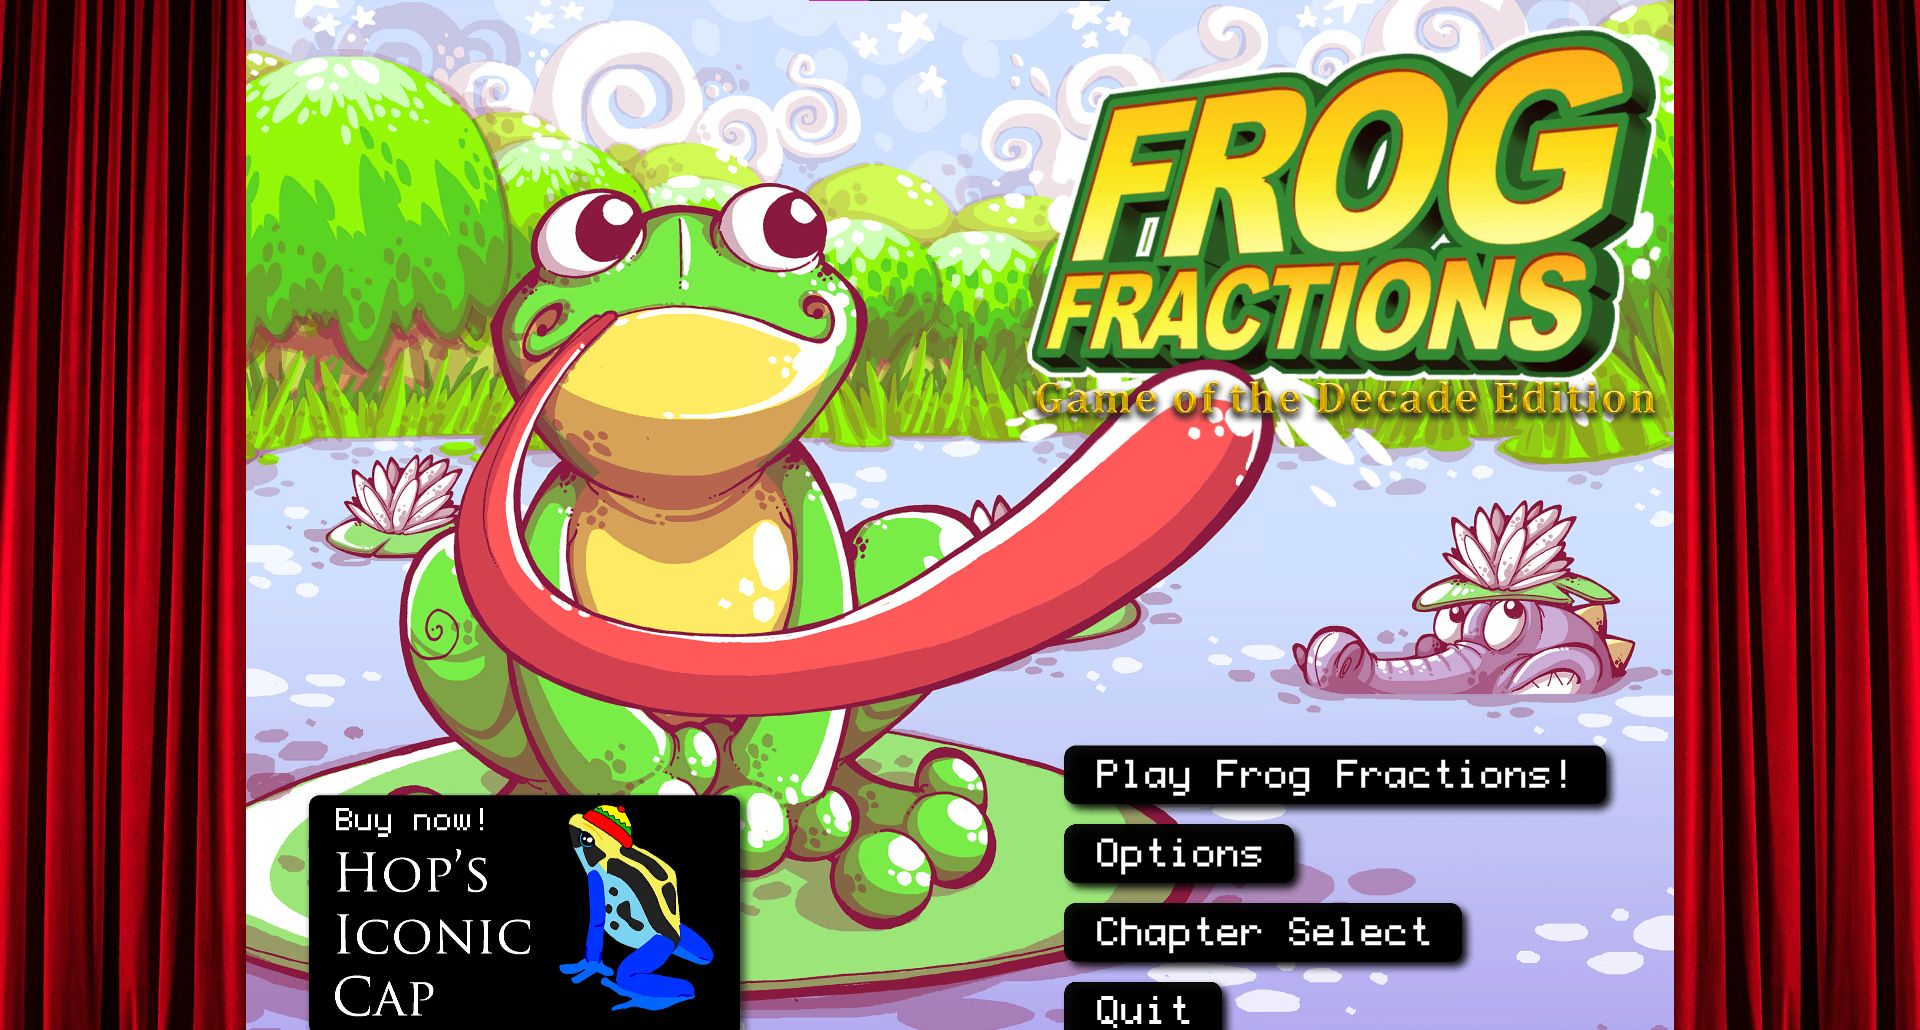 Frog Fractions: Game of the Decade edition is on Steam and everyone needs to play it